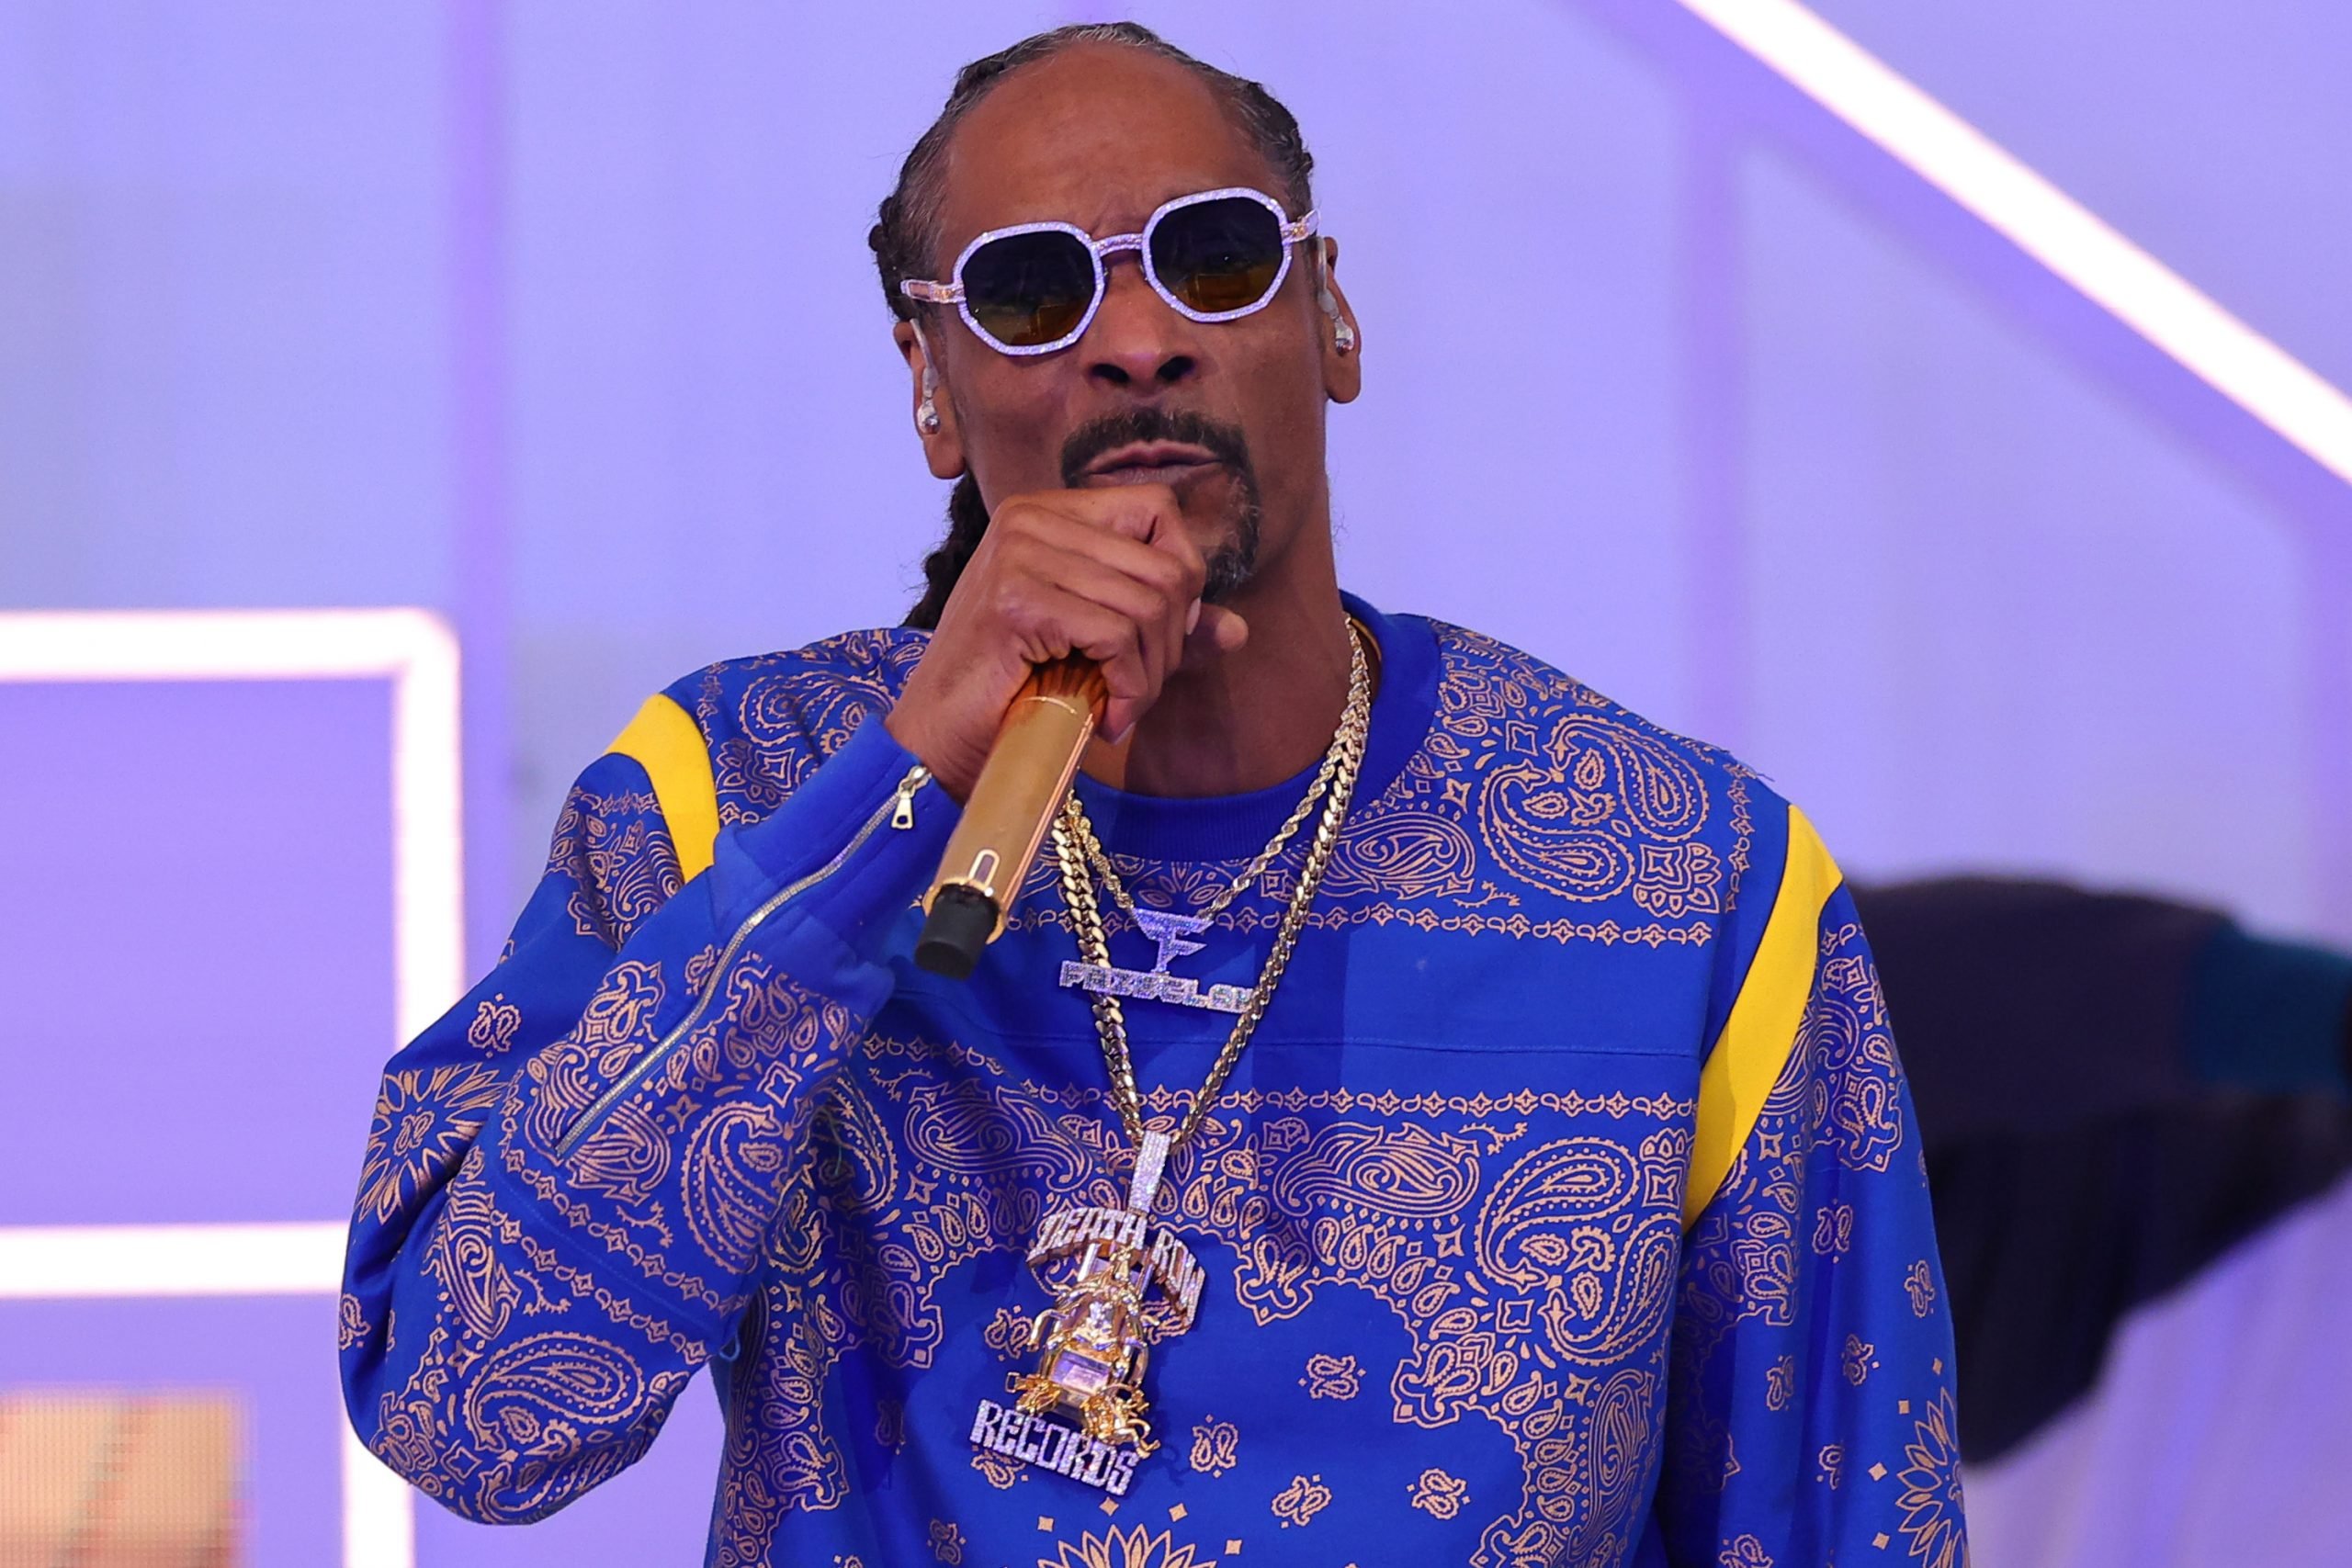 Snoop Dogg wearing blue at the Super Bowl